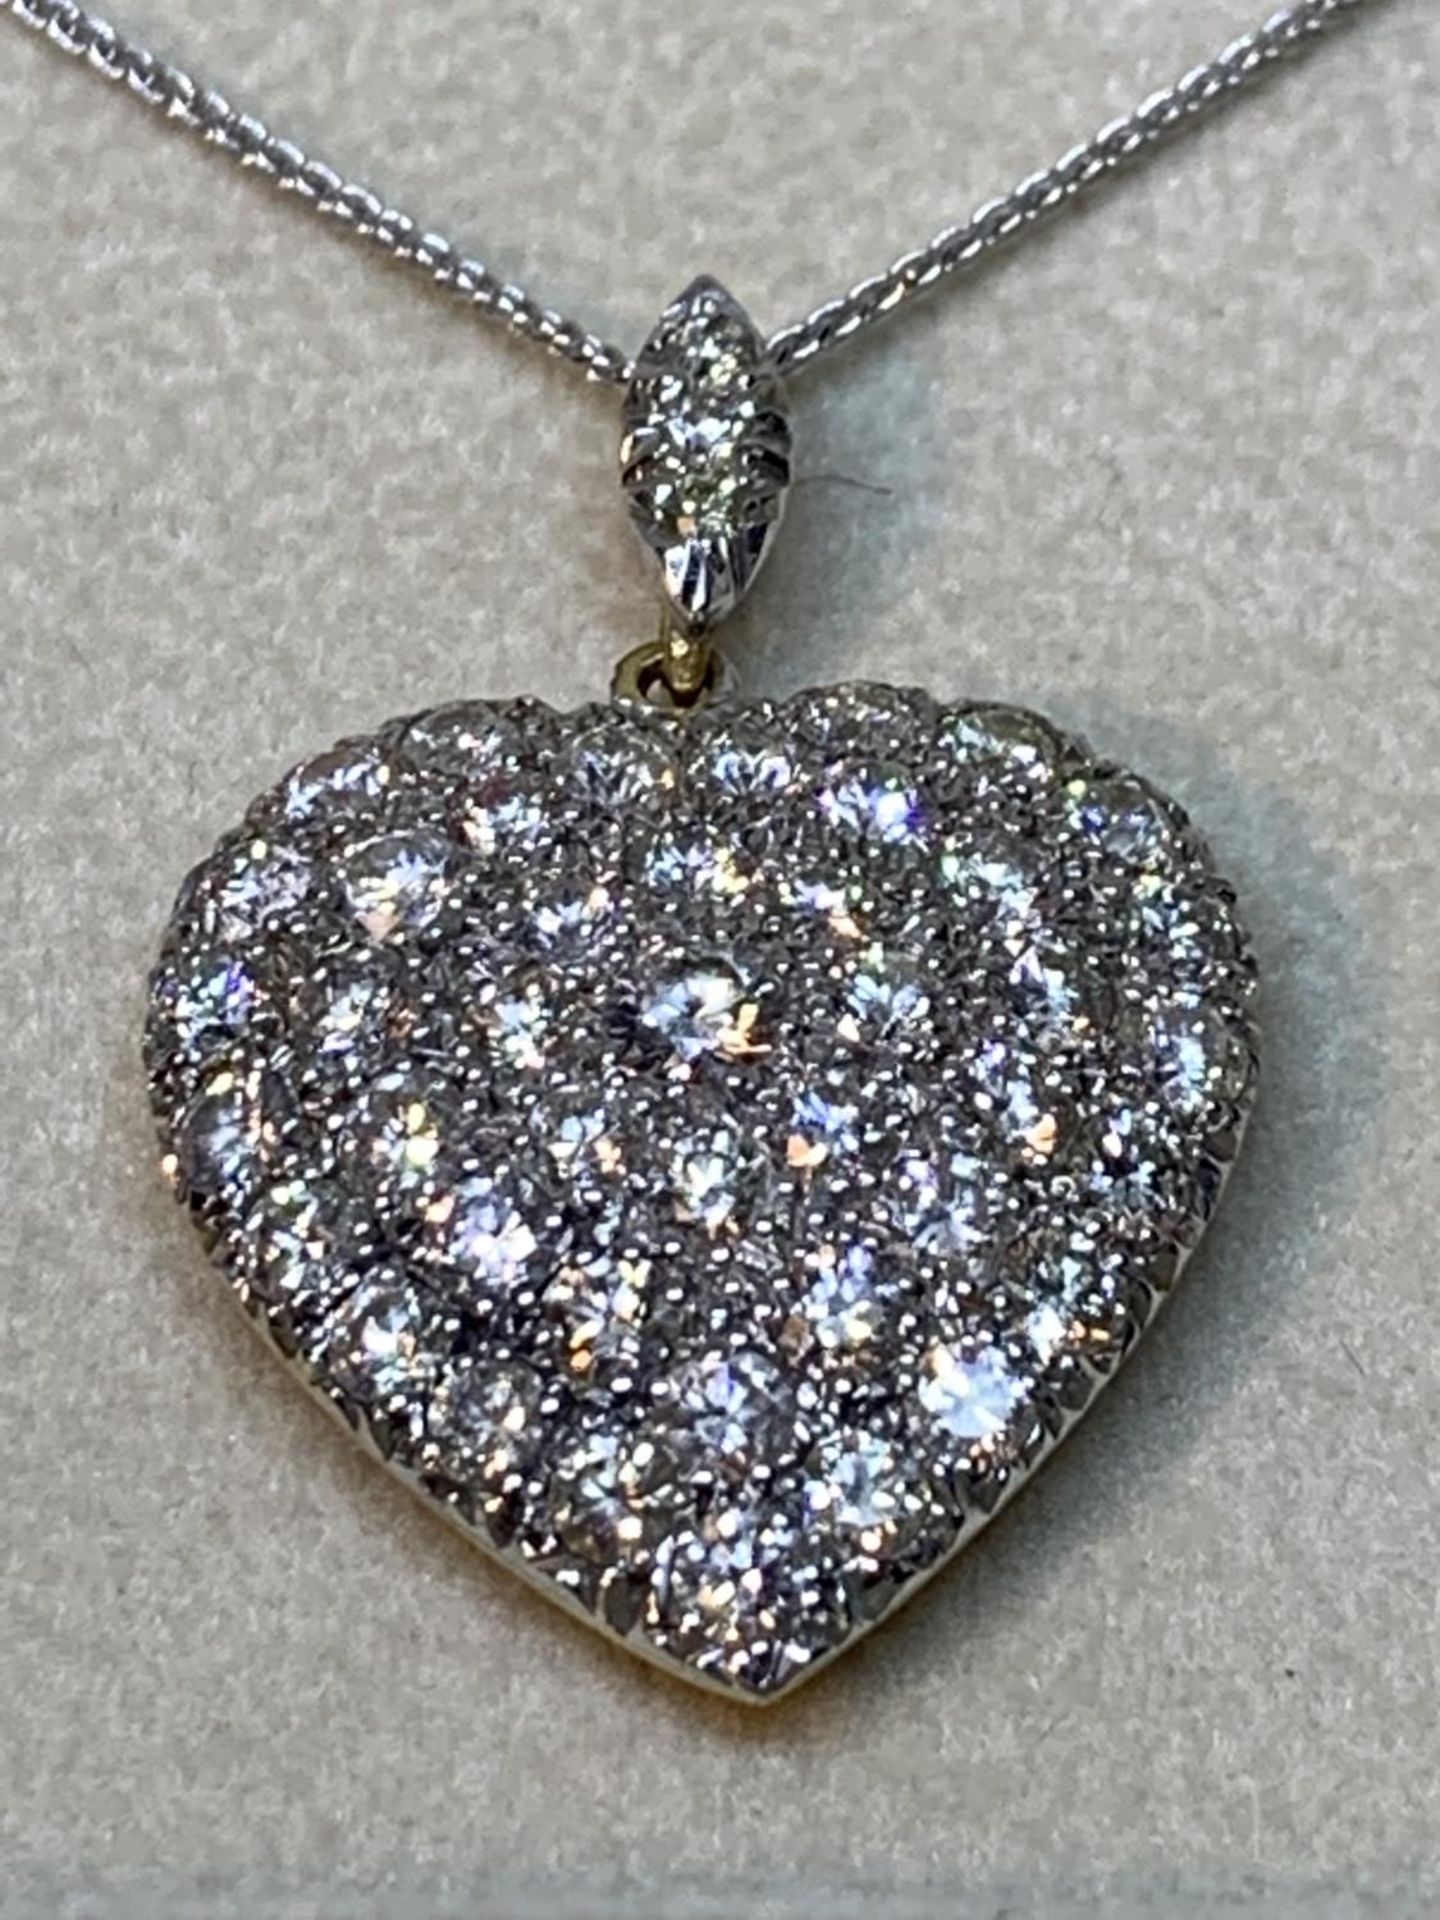 A 15 CARAT WHITE AND YELLOW GOLD LARGE DIAMOND ENCRUSTED HEART PENDANT WITH CHAIN LENGTH 44CM IN A - Image 3 of 8